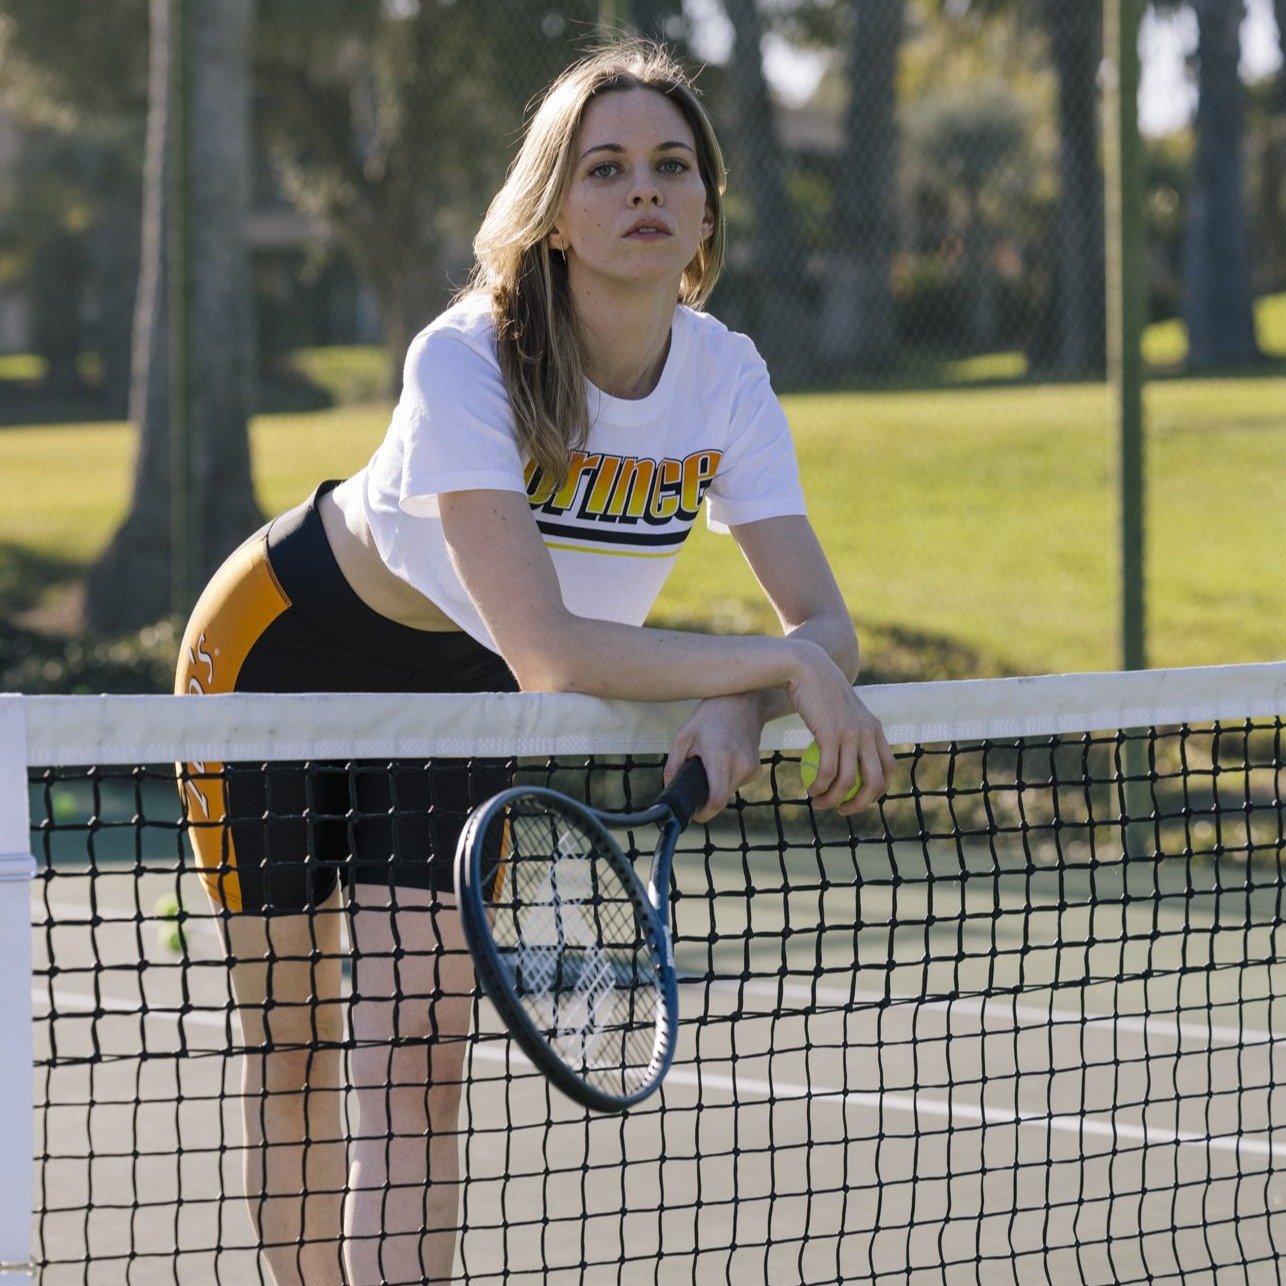 Woman leaning on tennis net wearing white crop top and black shorts